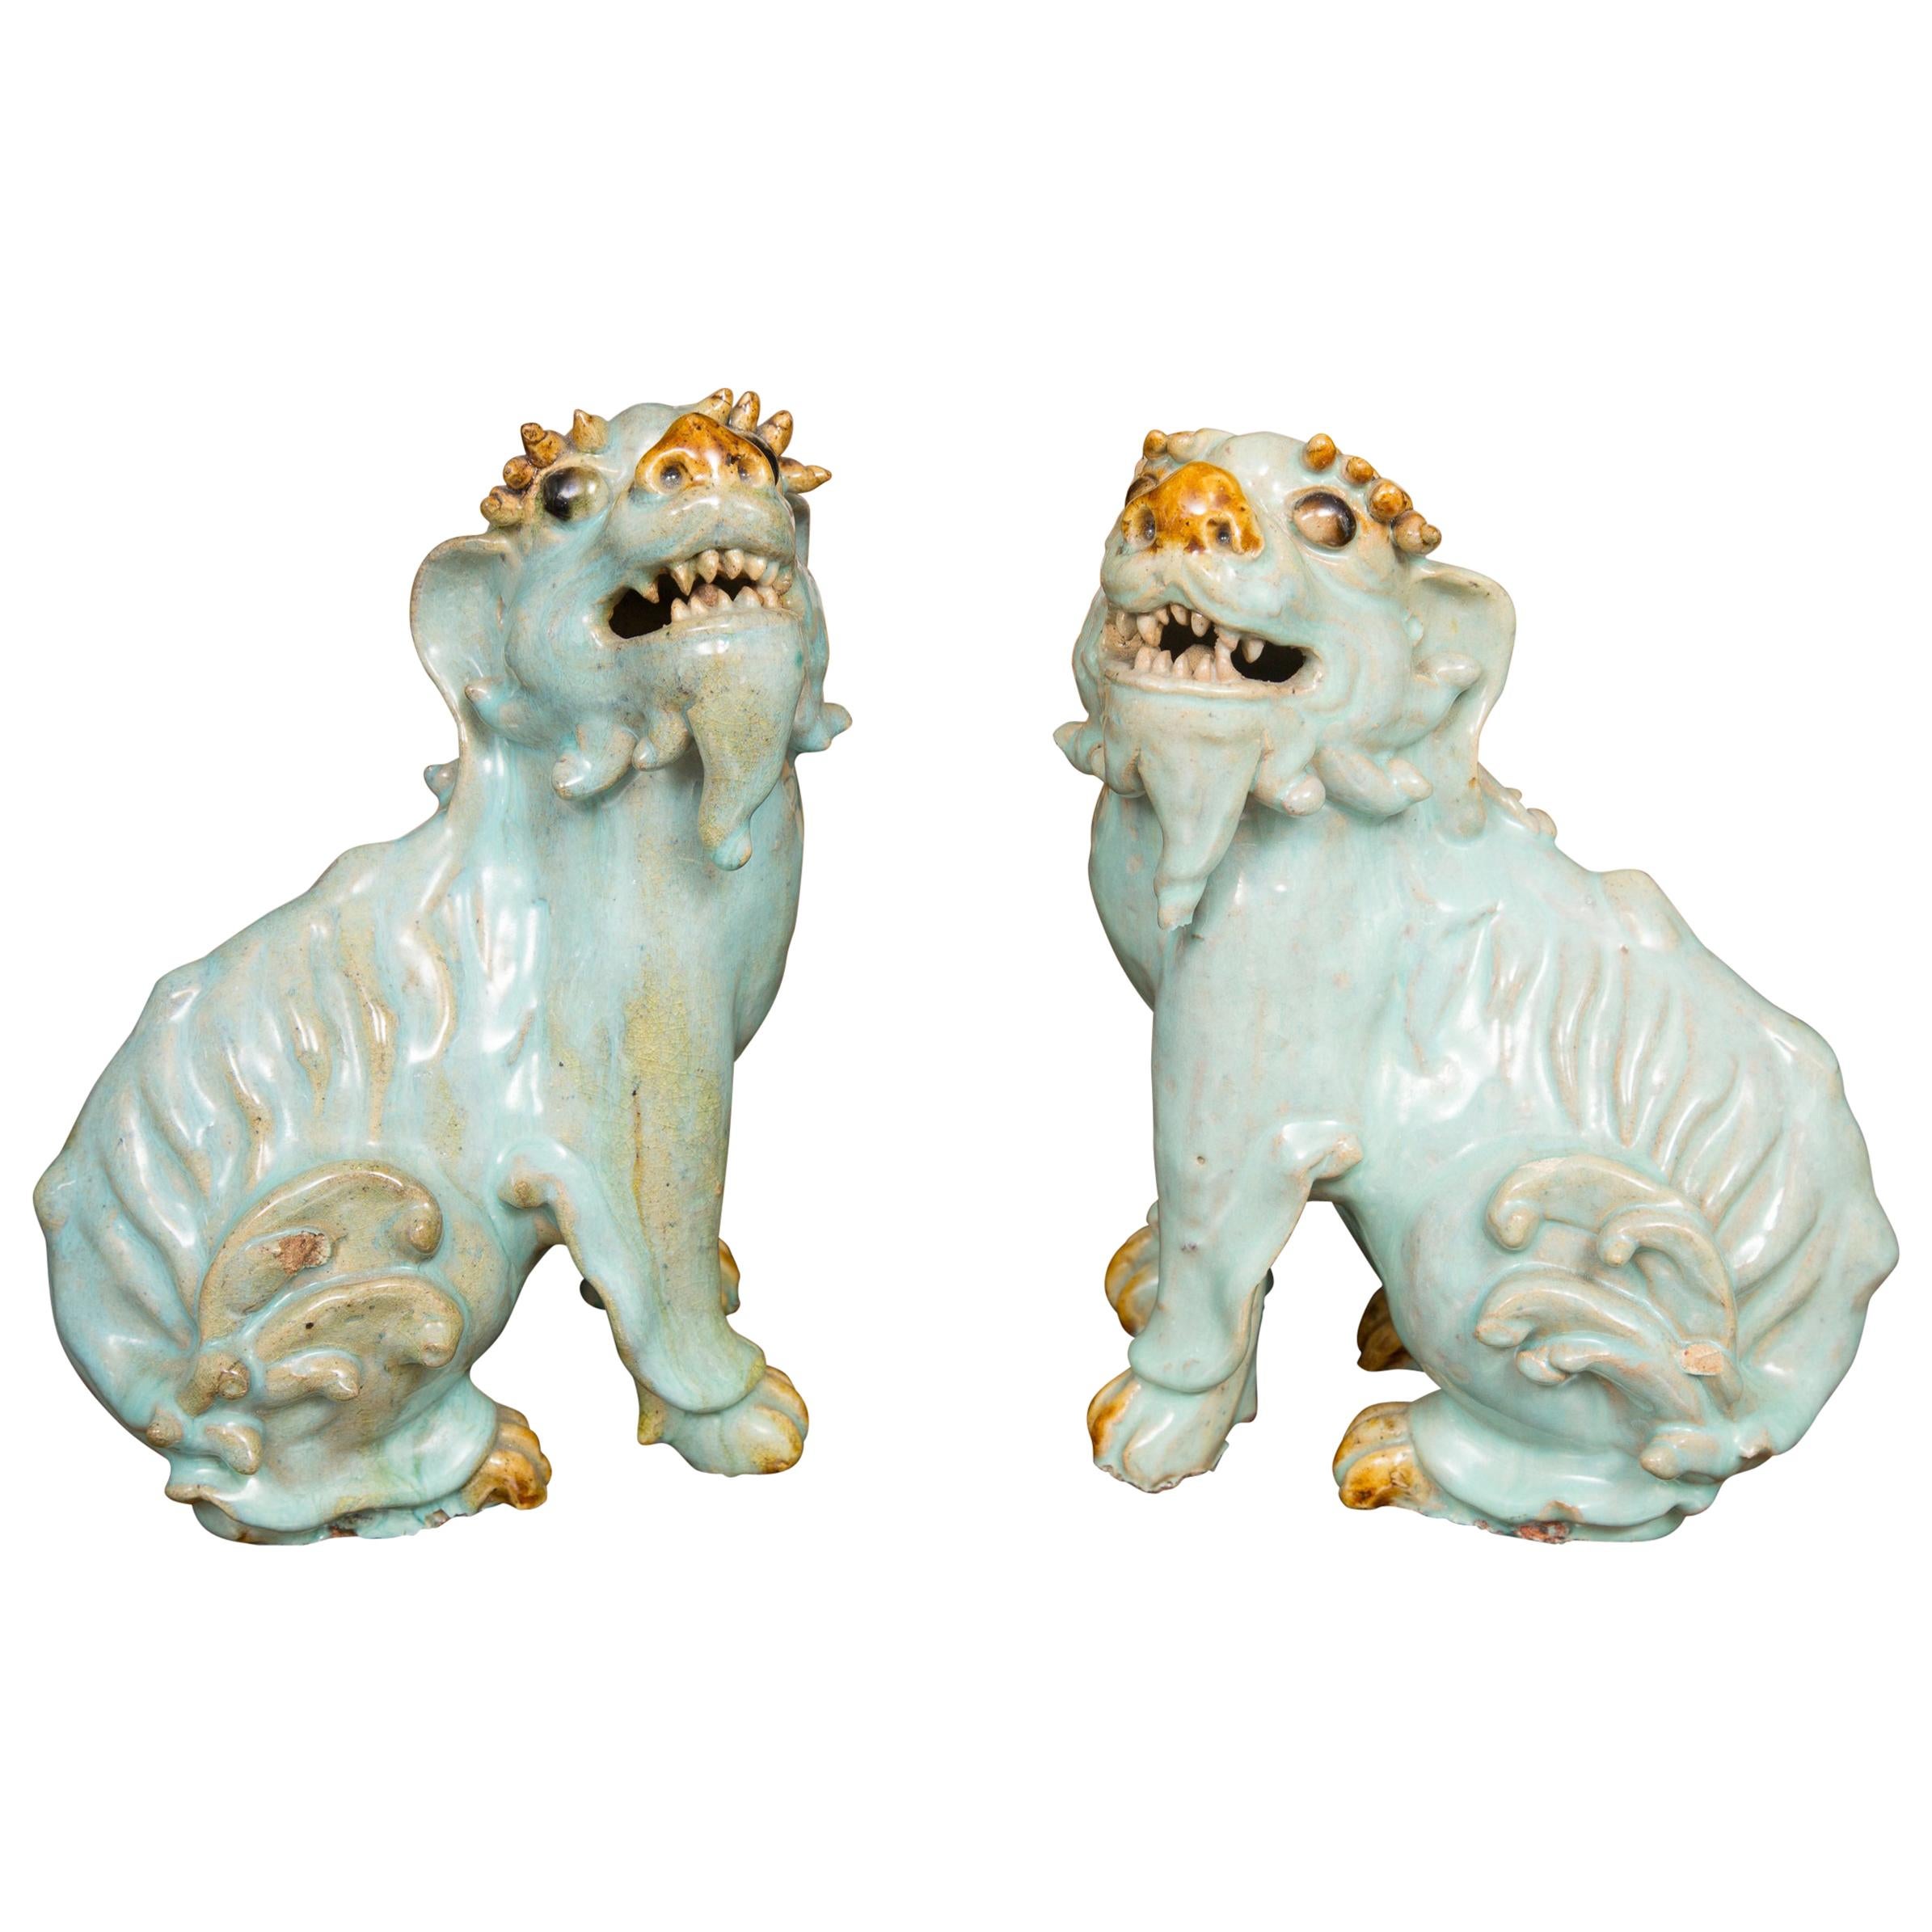 Pair of Chinese Glazed Bearded Dogs with Glass Inset Eyes